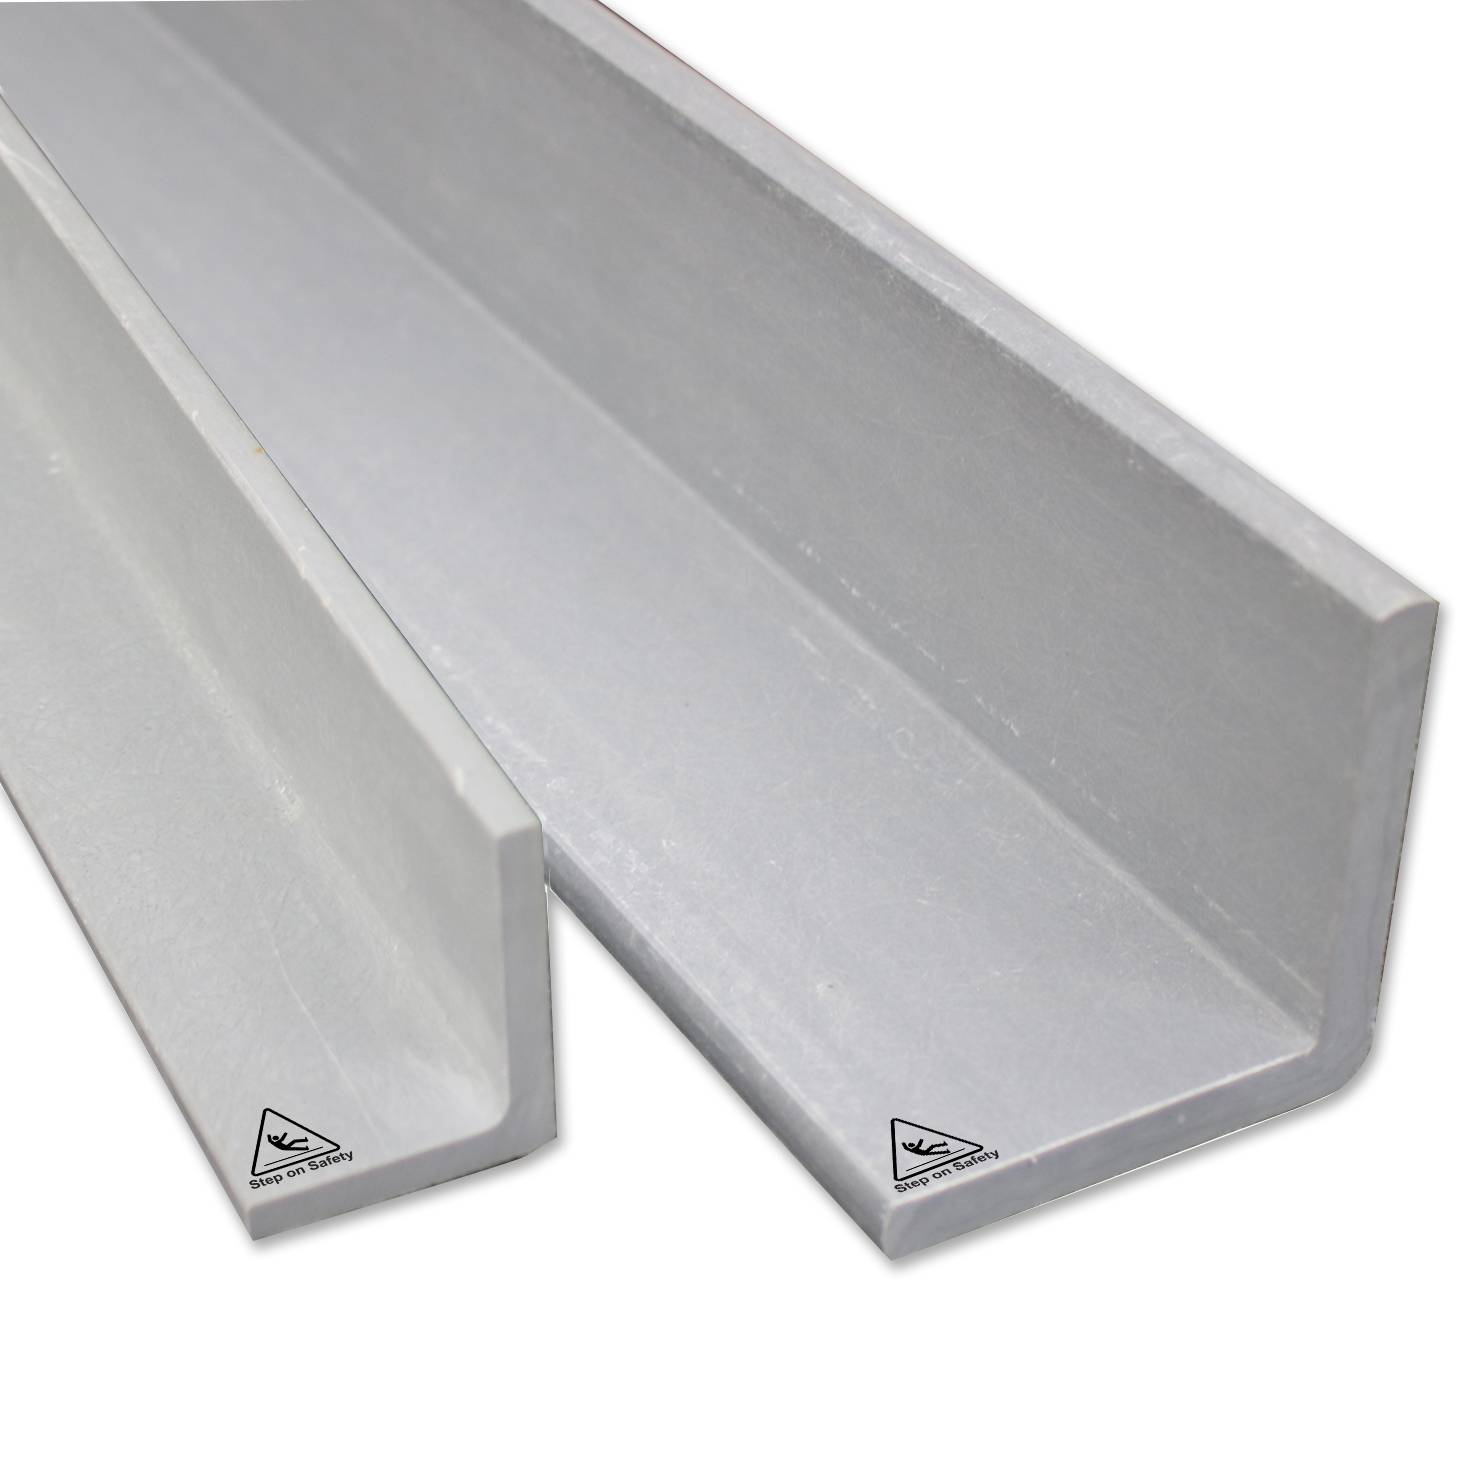 Universal GRP Structural Profiles - Pultruded GRP Profile